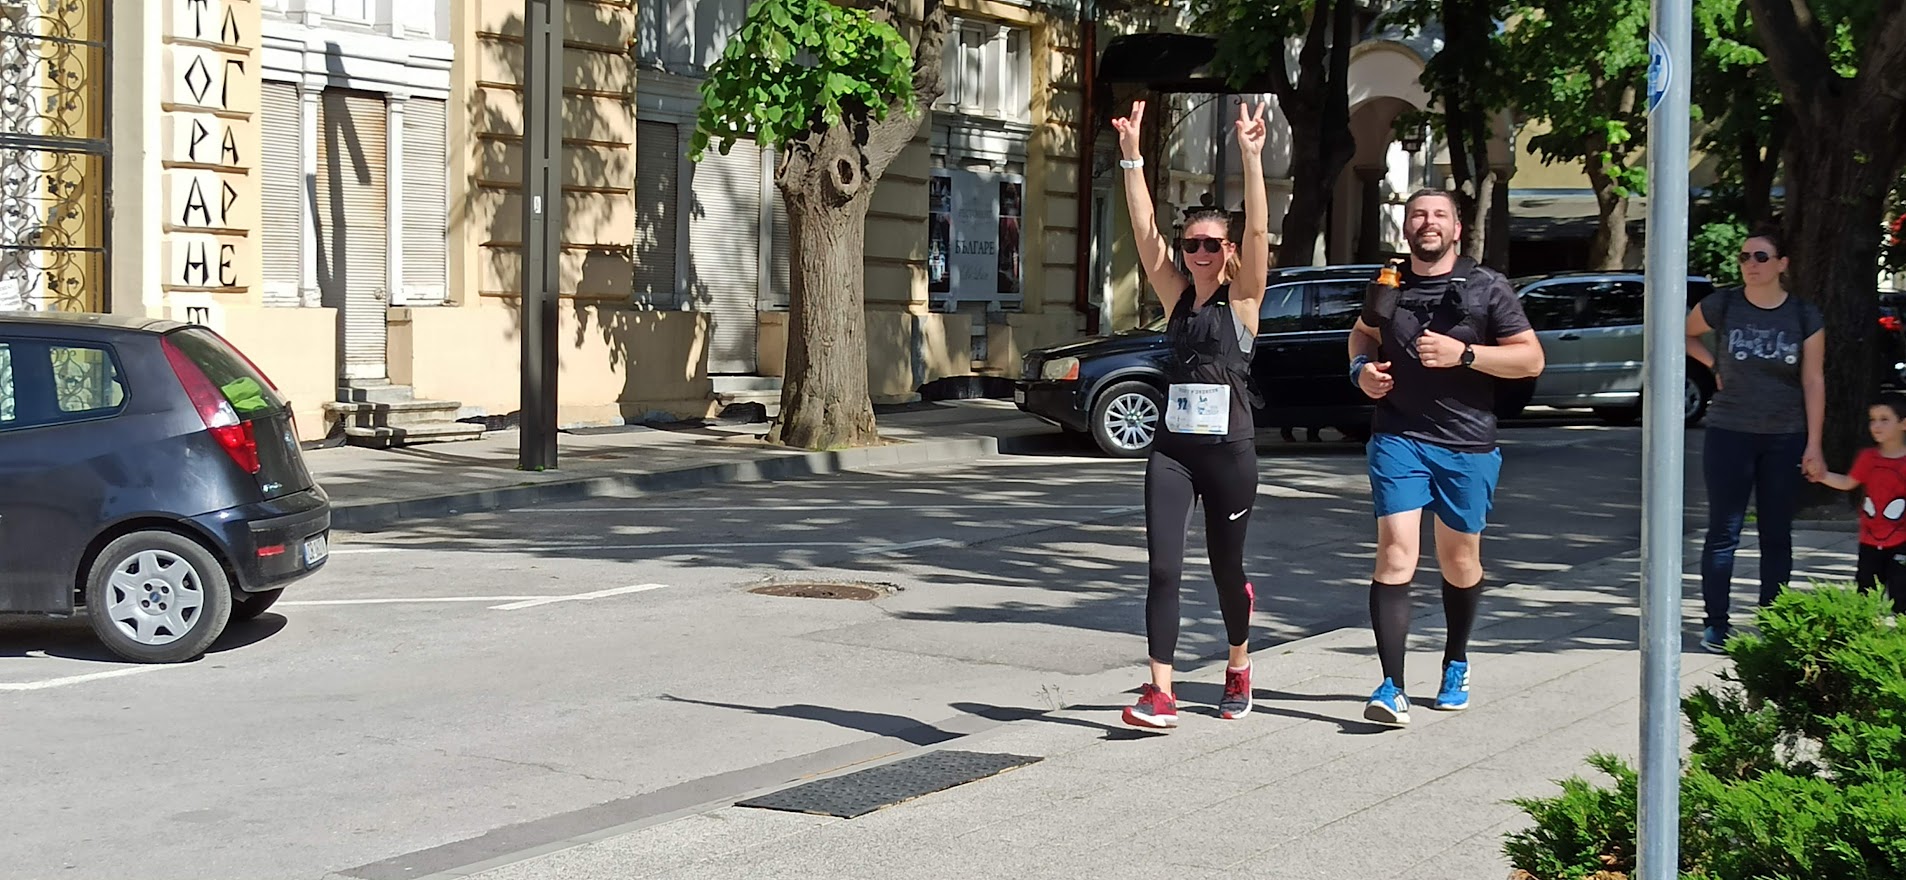 Partricipants in the Run for Smiles run through the streets of Vratsa